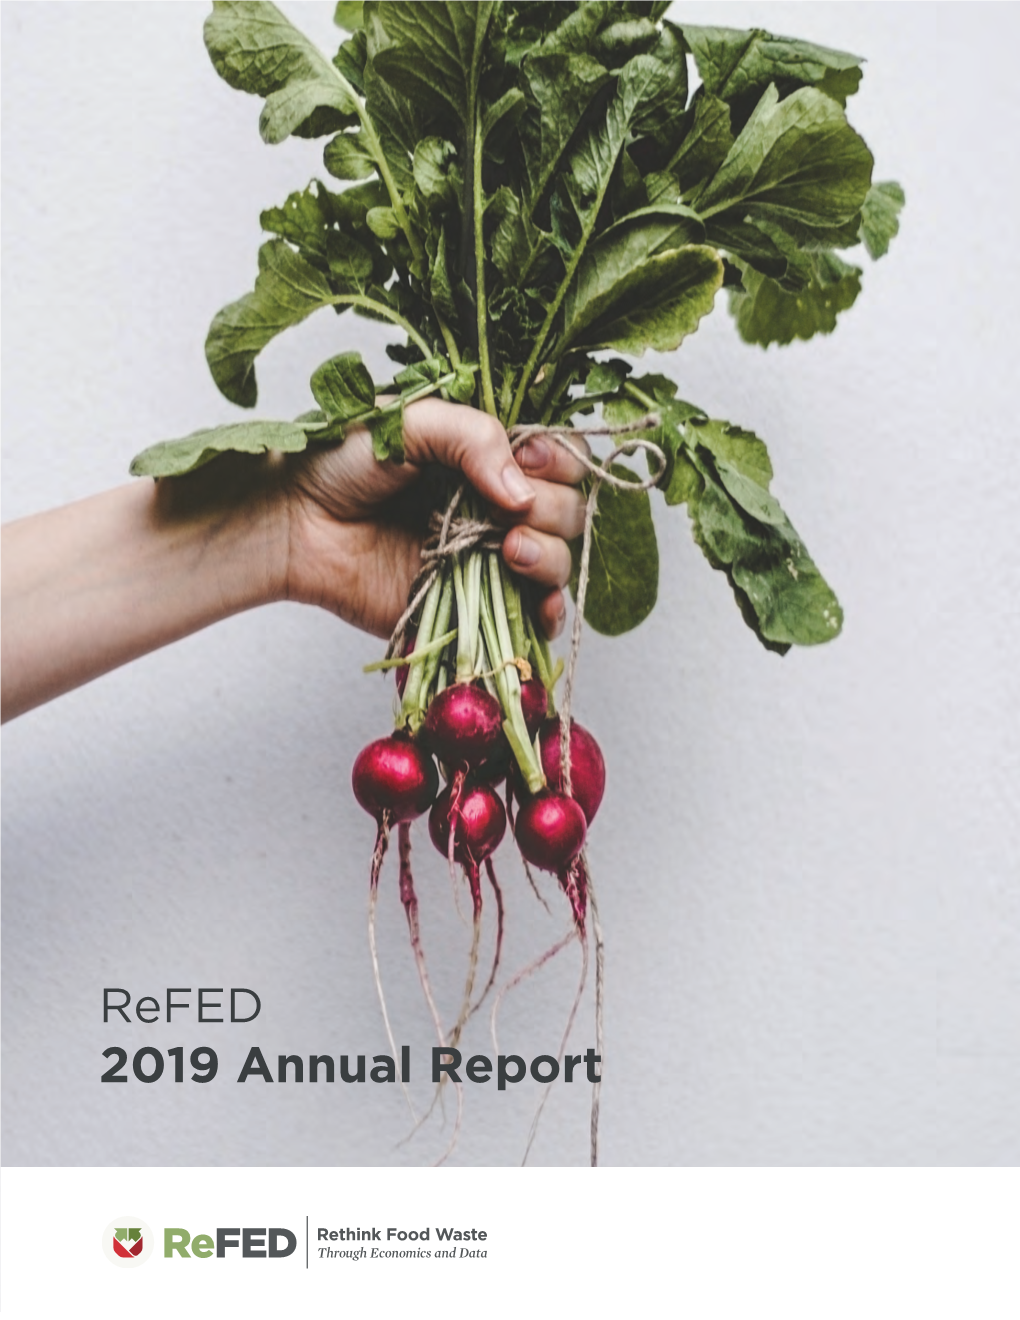 2019 Annual Report OUR VISION Eliminate Food Waste in Order to Increase Food Security, Spur Economic Growth, and Protect the Environment